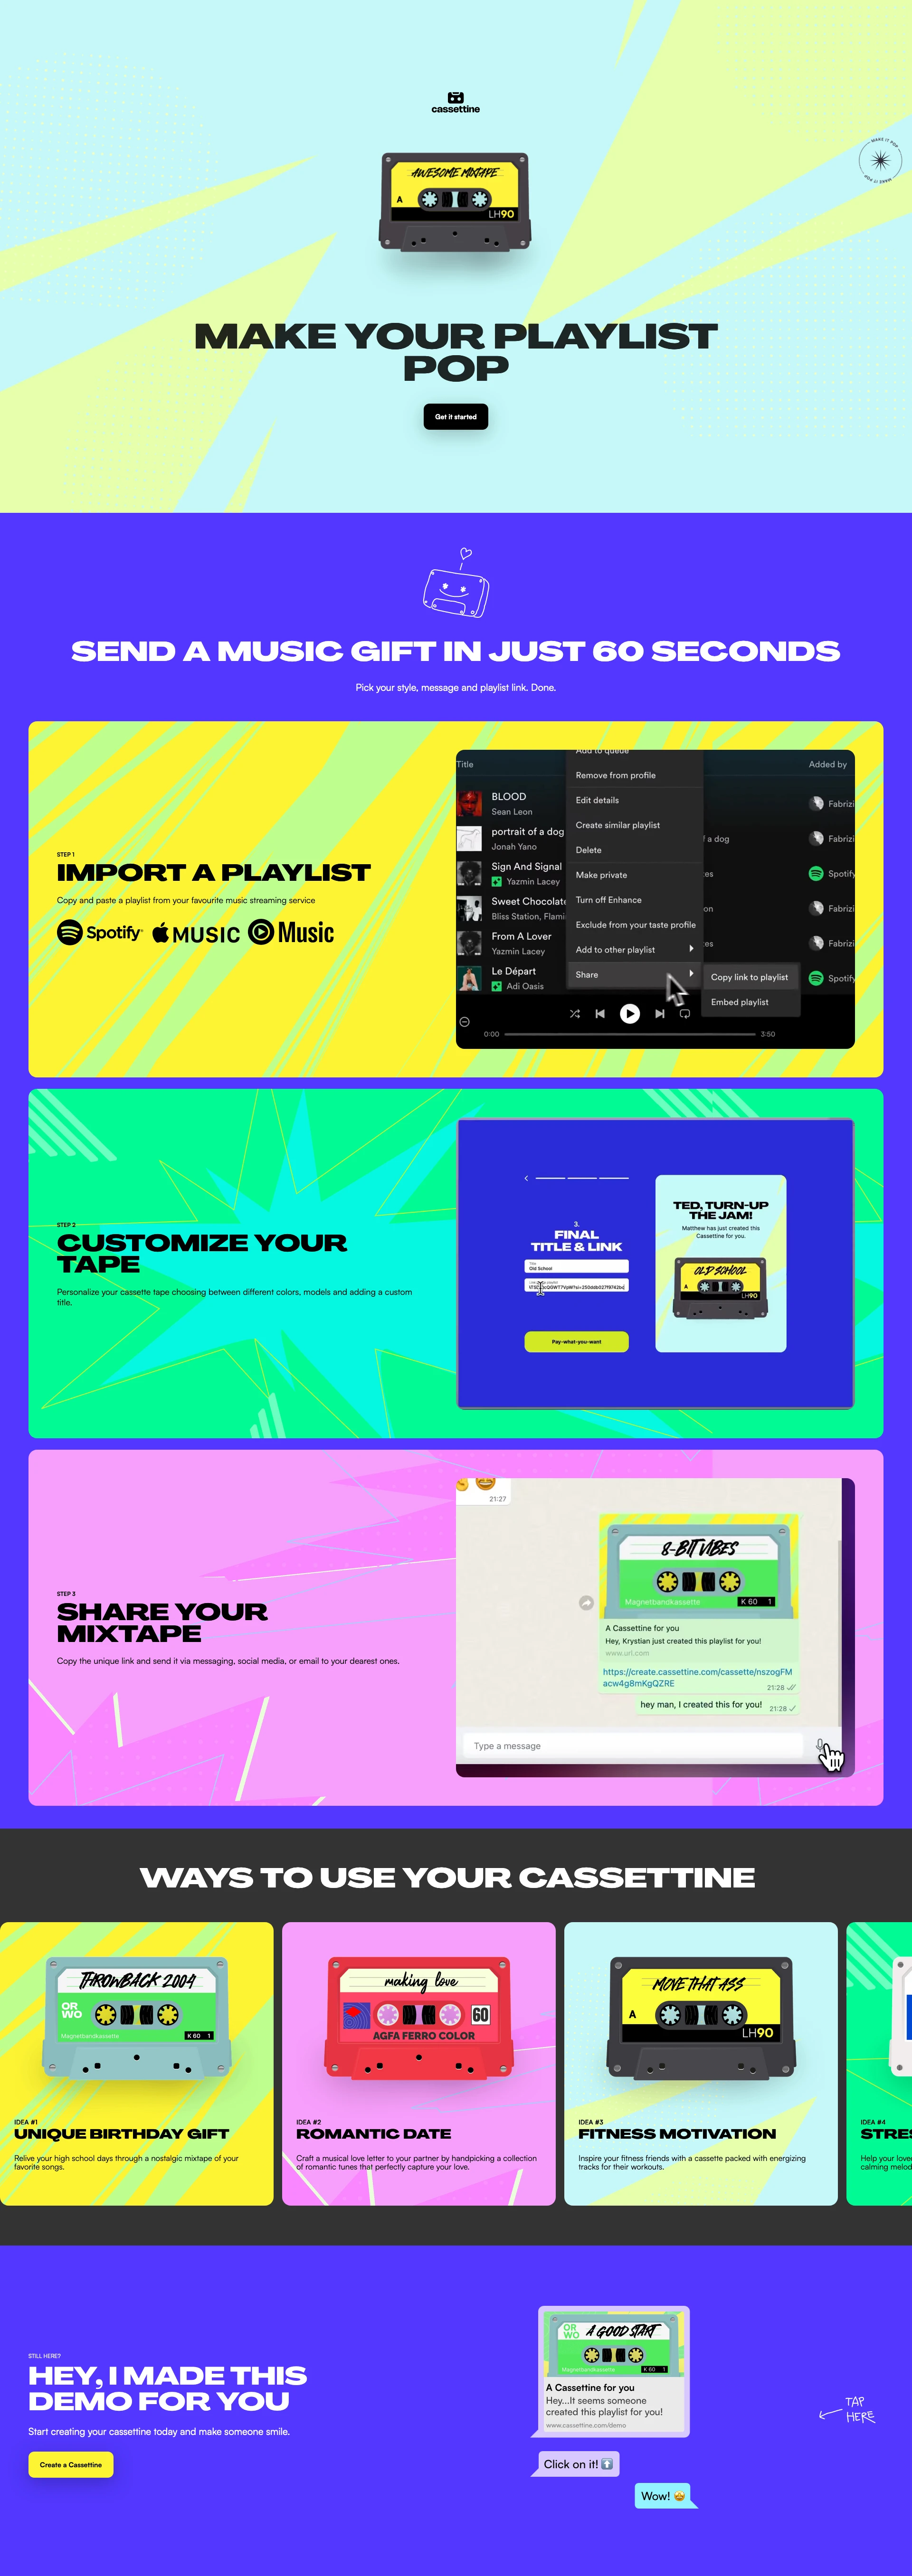 Cassettine Landing Page Example: Make your playlist pop. Send a customized music playlist from spotify, apple music or youtube music in just 60 seconds.